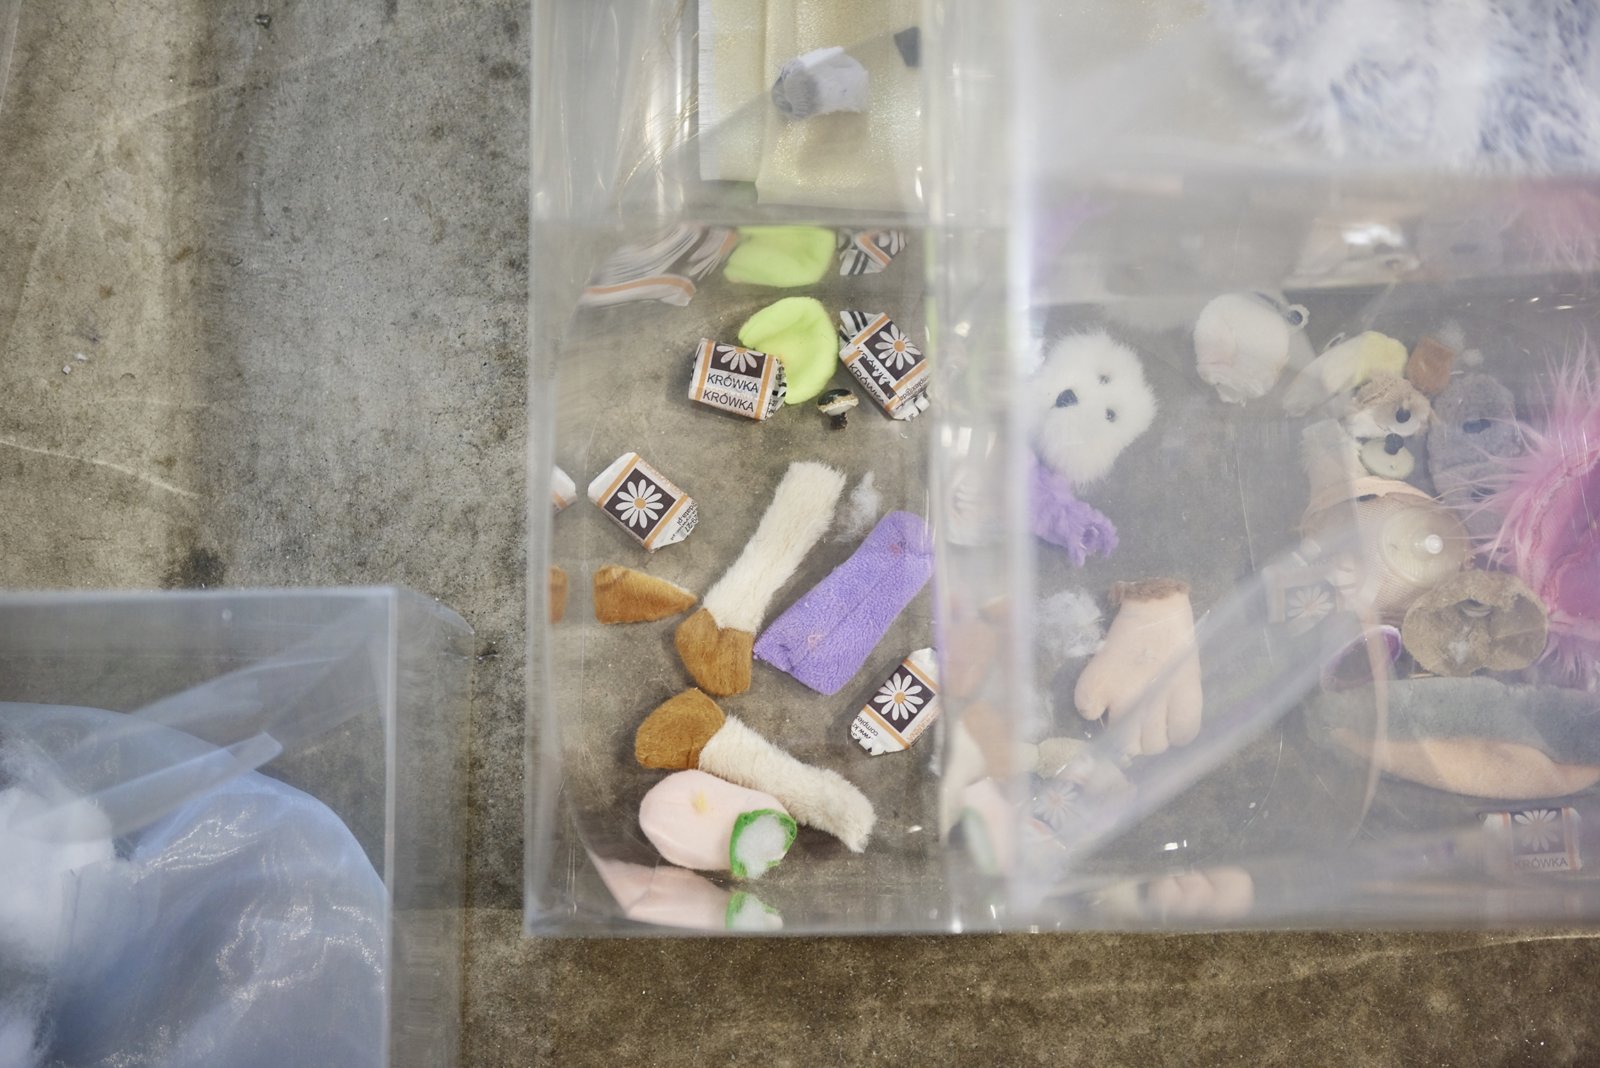 Liz Magor, Pet Co. (detail), 2018, polyester film, textiles, paper, stuffed toys, rat skins, mixed media, 44 x 204 x 156 in. (112 x 518 x 396 cm). Installation view, BLOWOUT, Carpenter Center for Visual Arts, Cambridge, USA, 2019